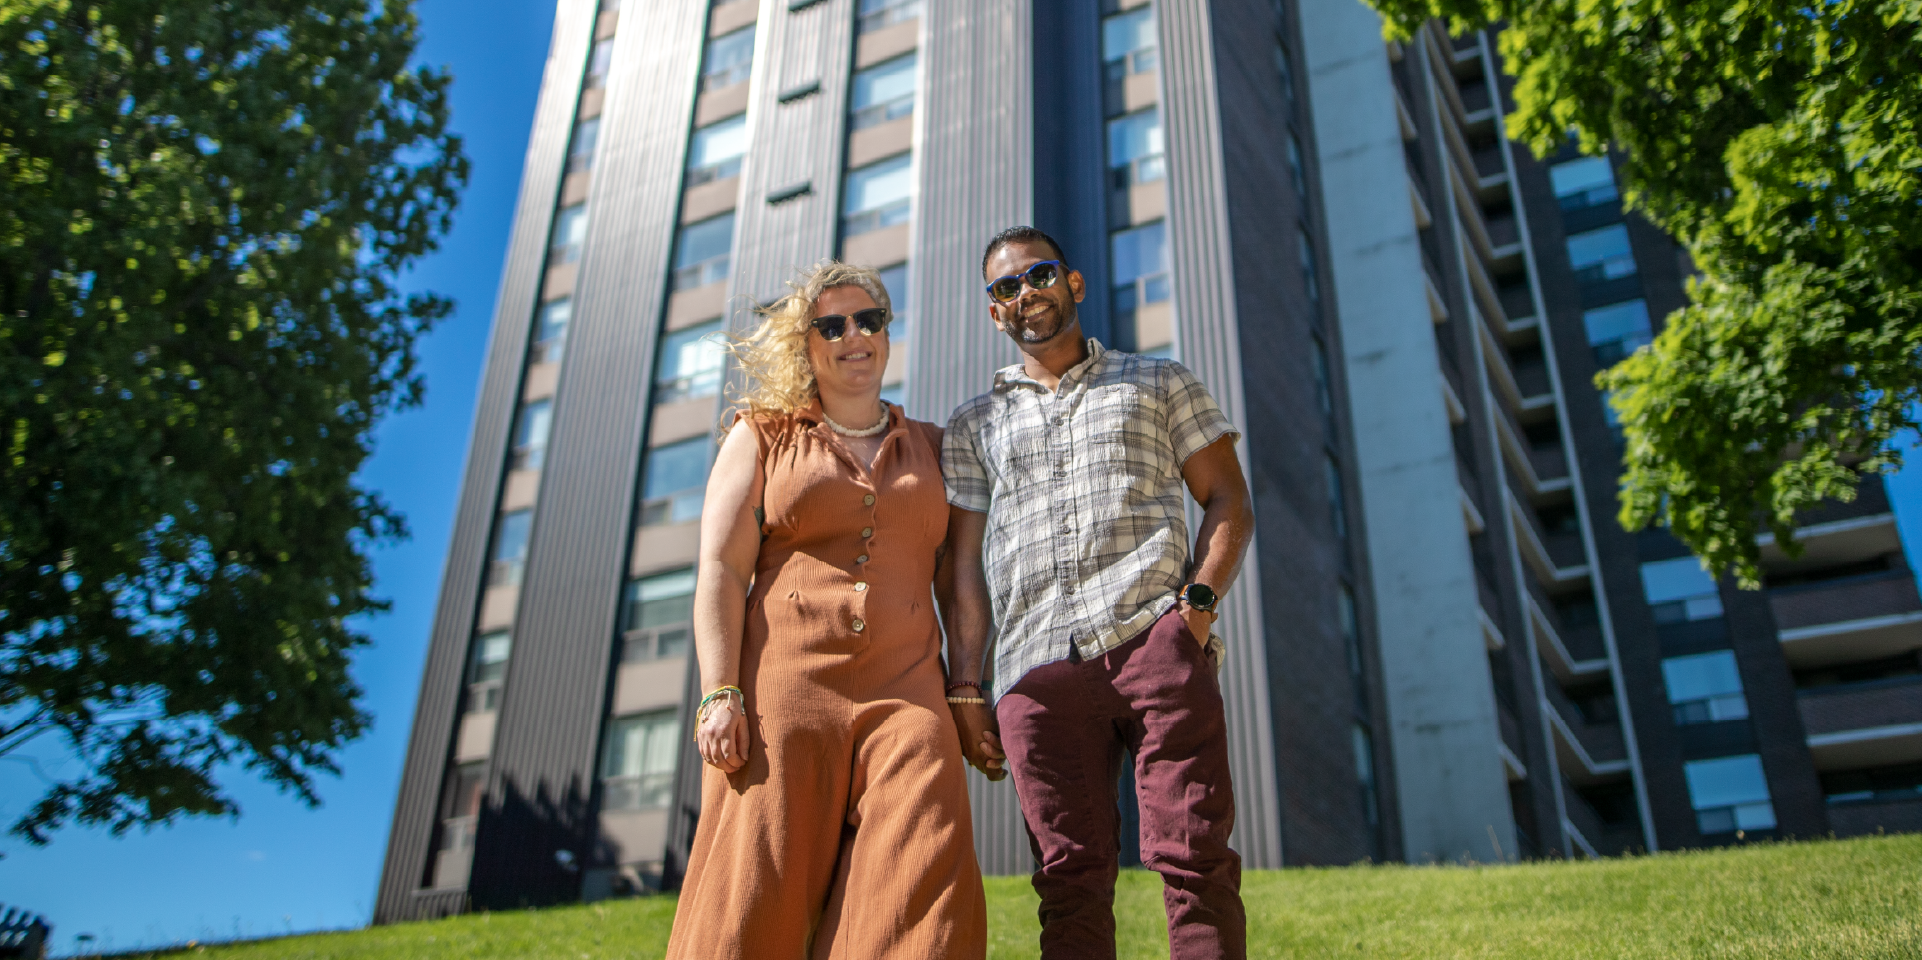 Toronto couple standing in front of condo building - buy and sell homes stress free with Properly